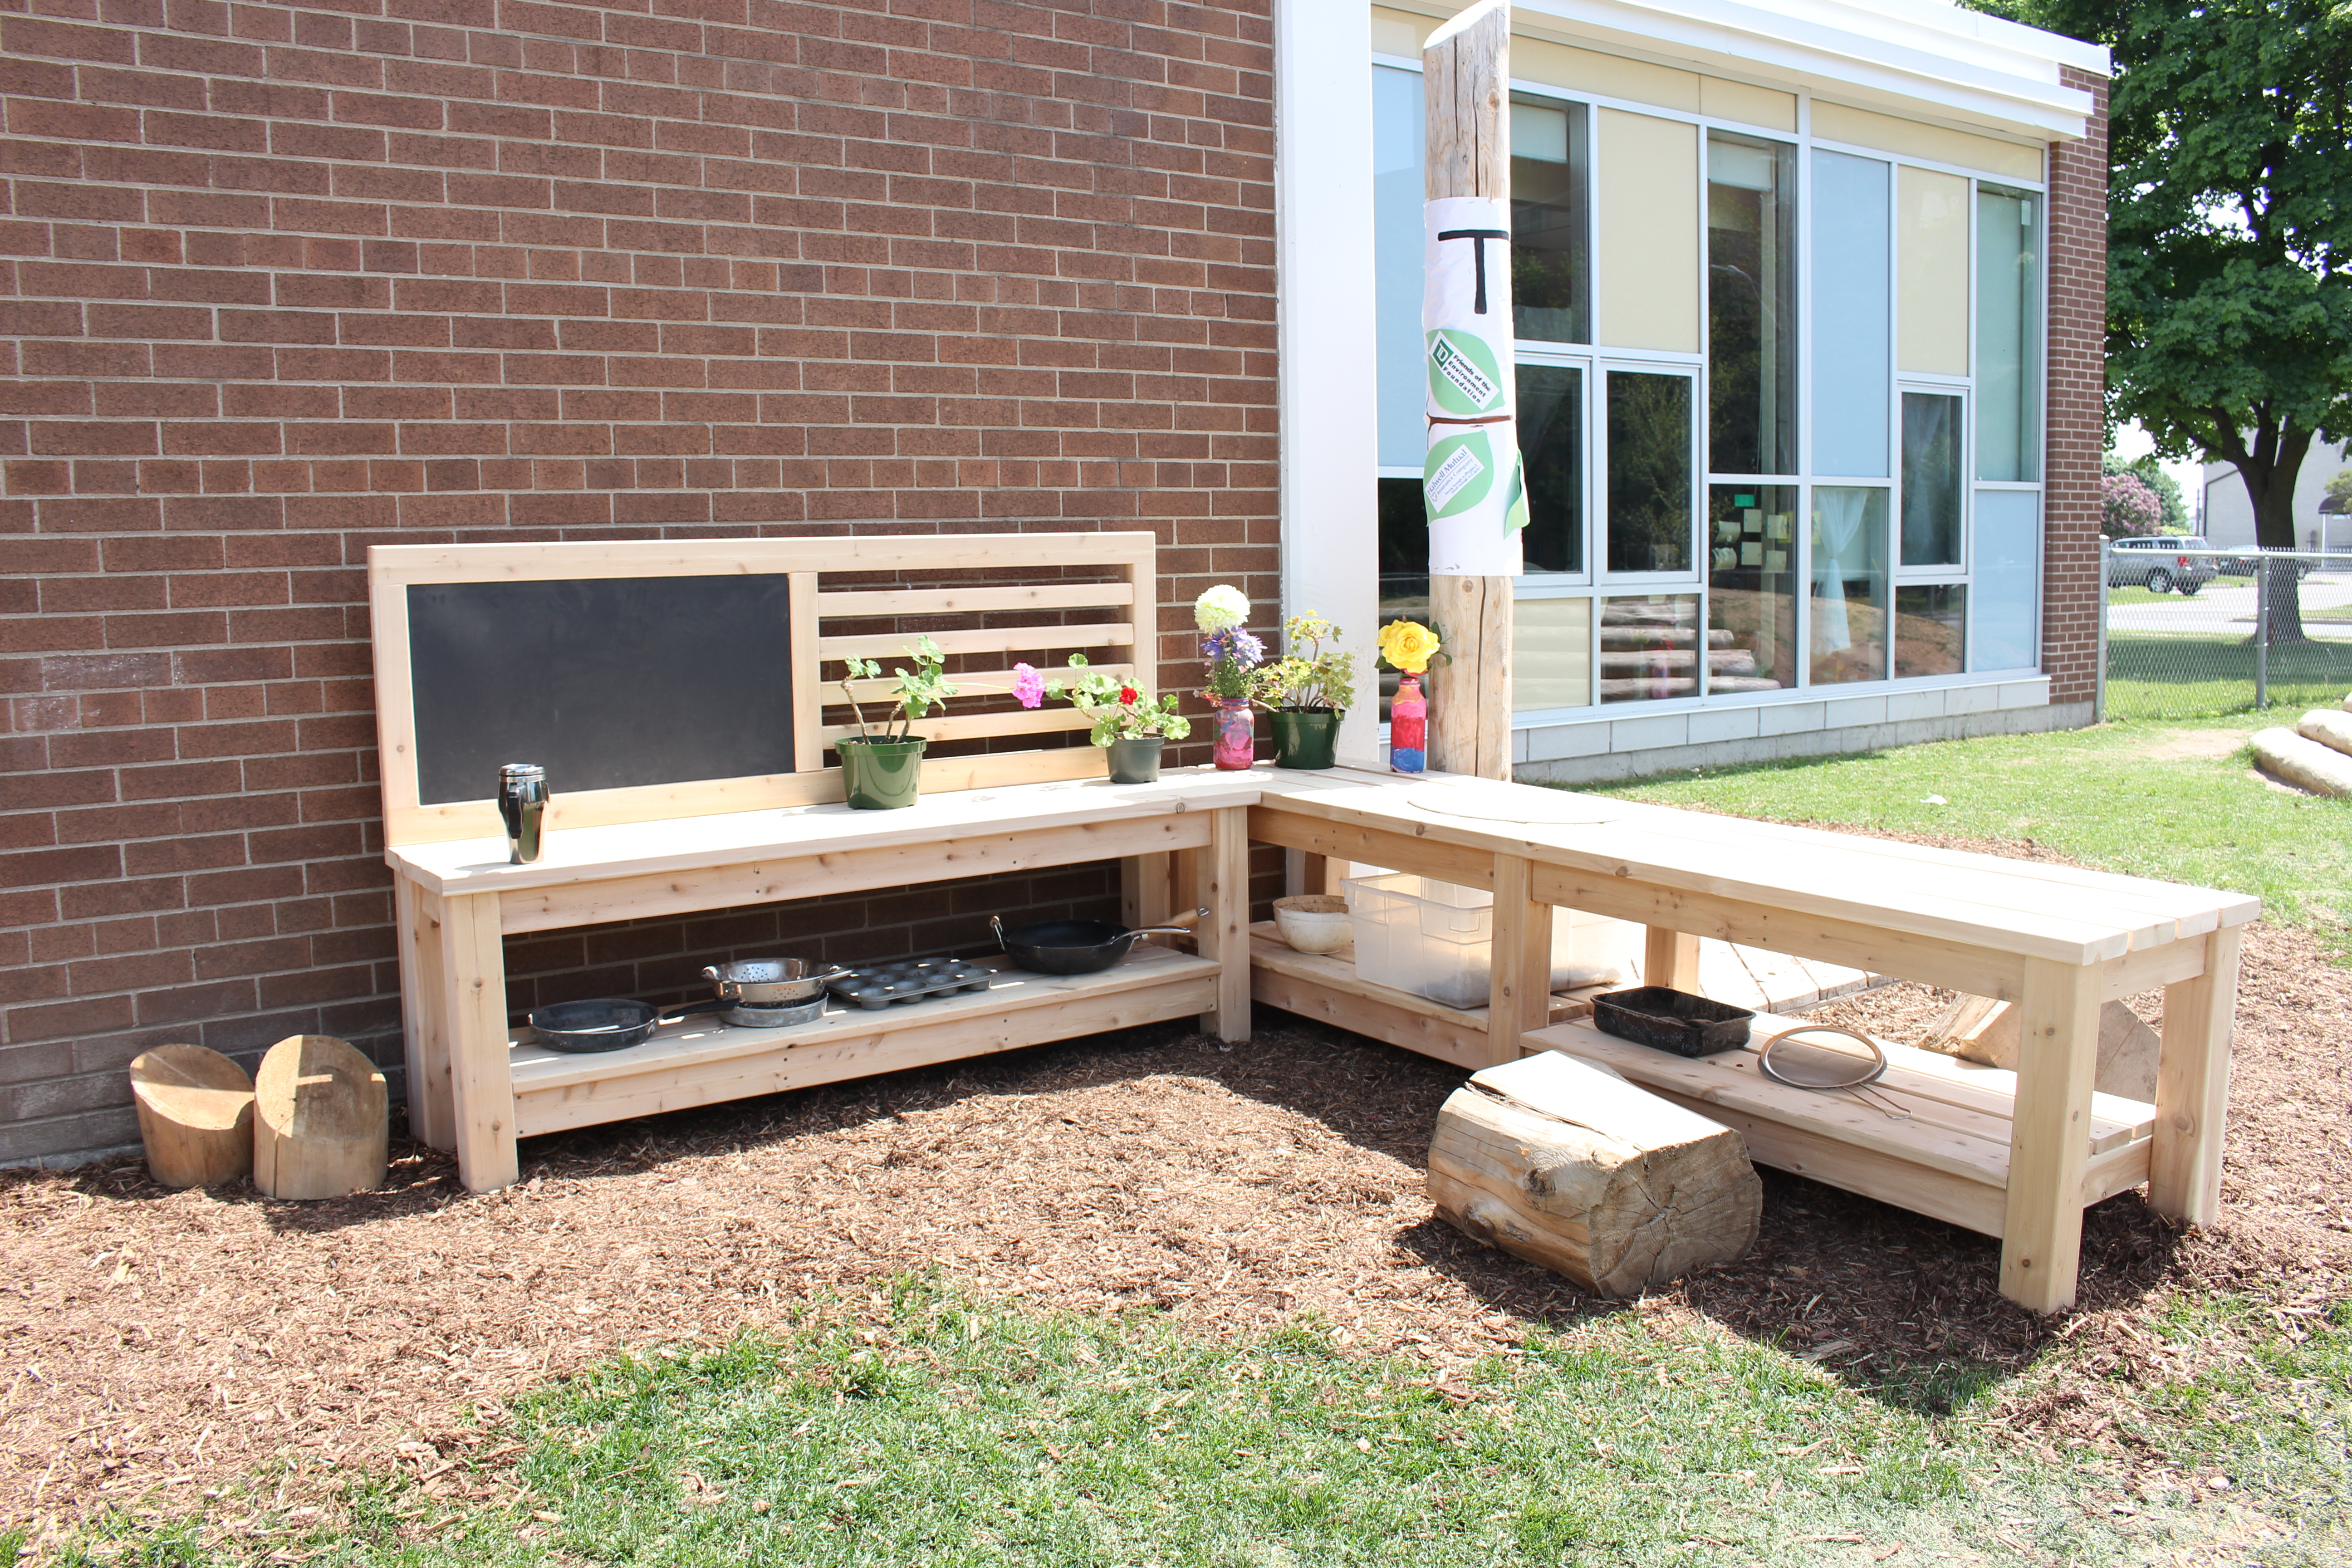 Rockway's new natural learning space is equipped with an outdoor play kitchen!